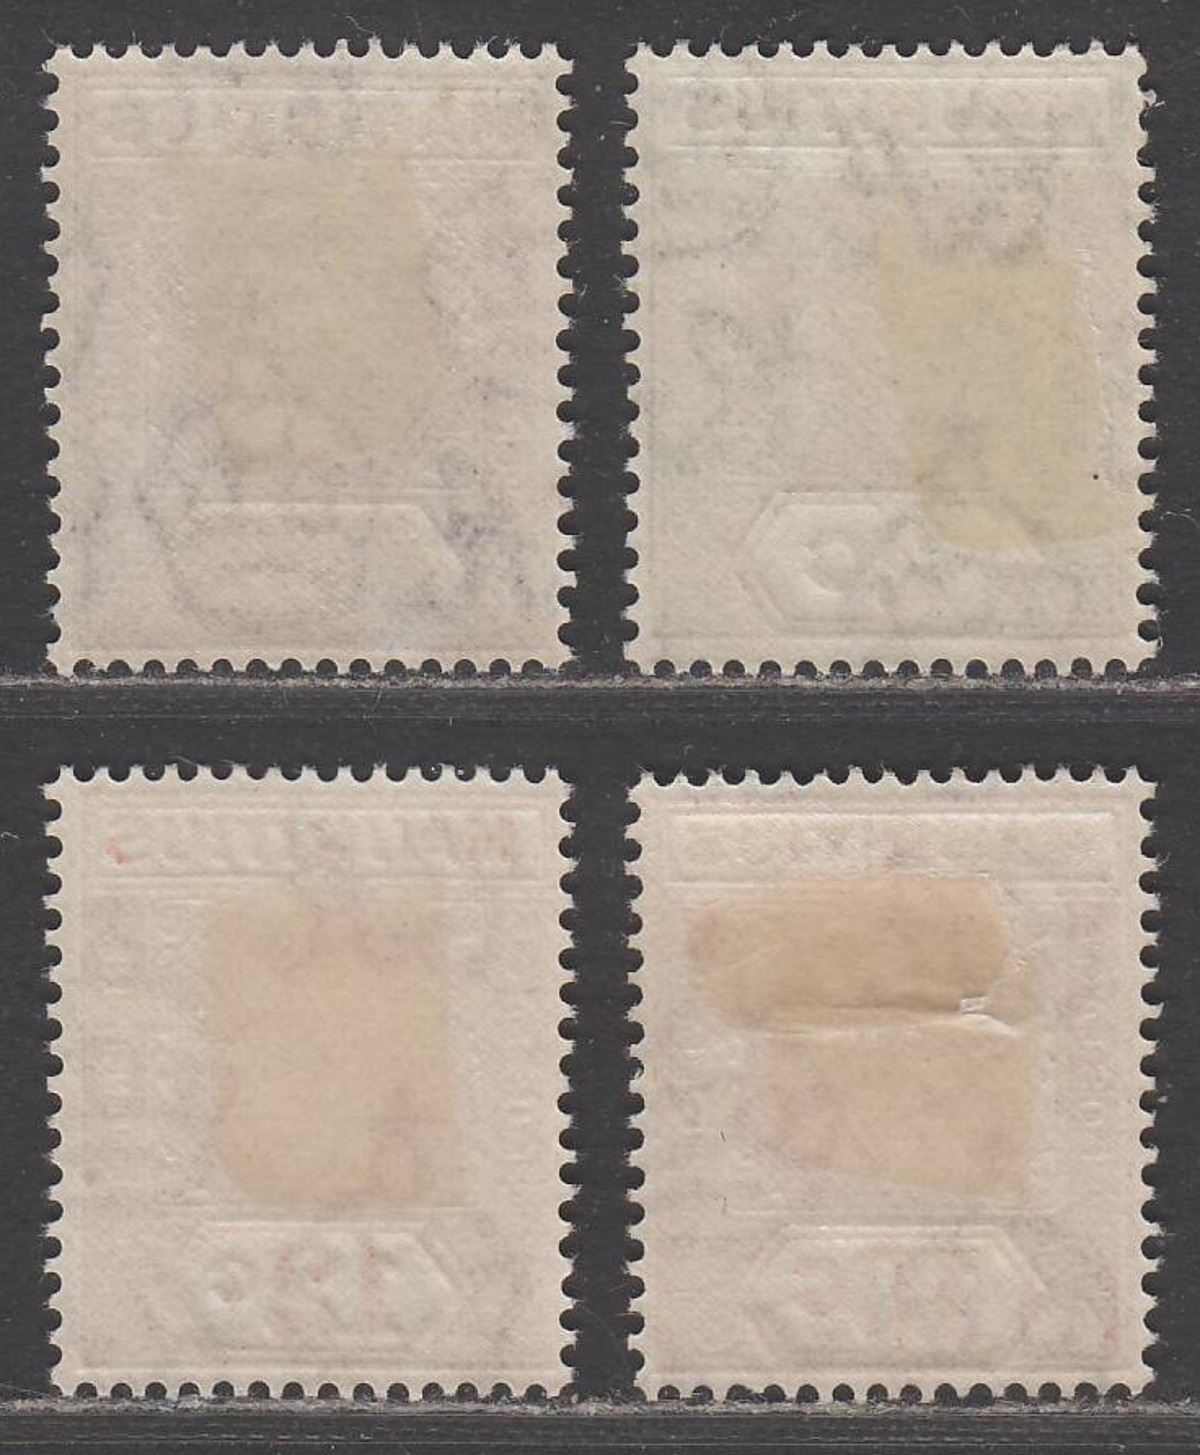 Mauritius 1942 King George VI Selection to 12c perf 15x14 Mint cat £158